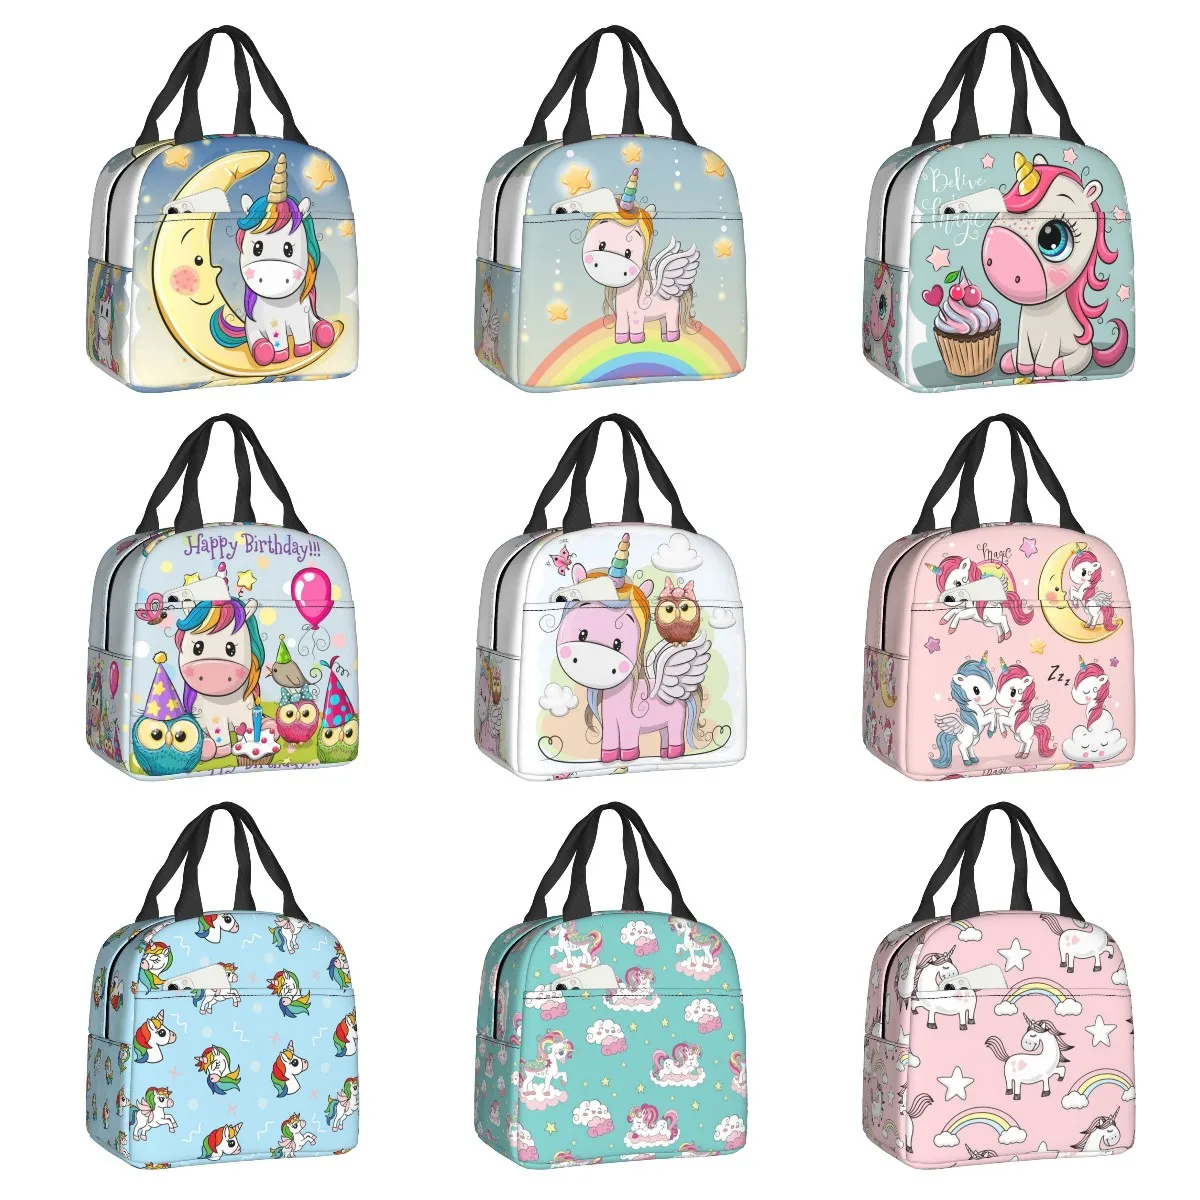 

Cute Unicorn Sitting On Moon Portable Lunch Box Women Waterproof Cooler Thermal Food Insulated Lunch Bag School Children Student